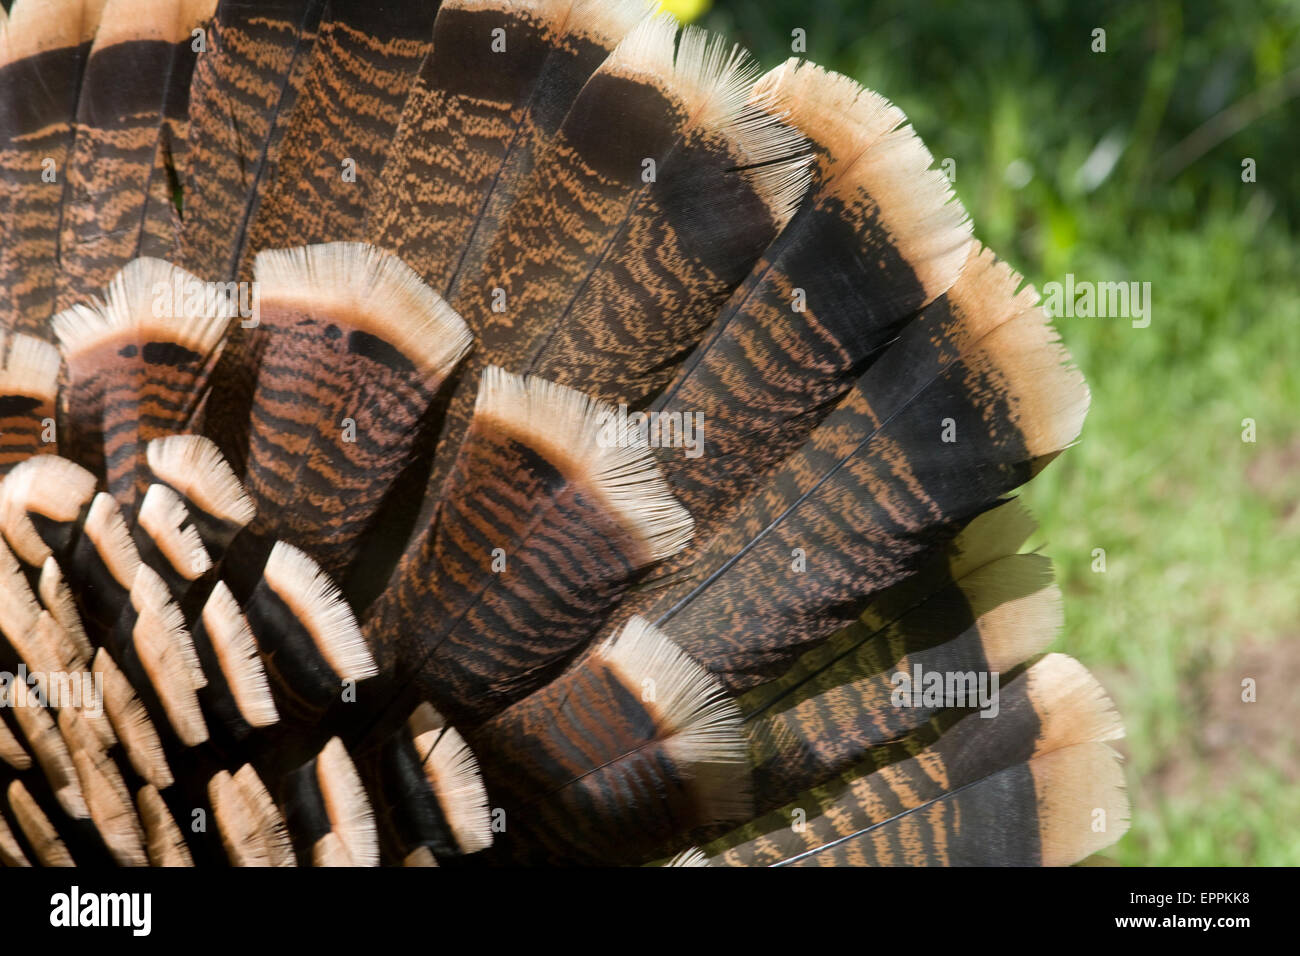 What Do Turkey Feathers Look Like